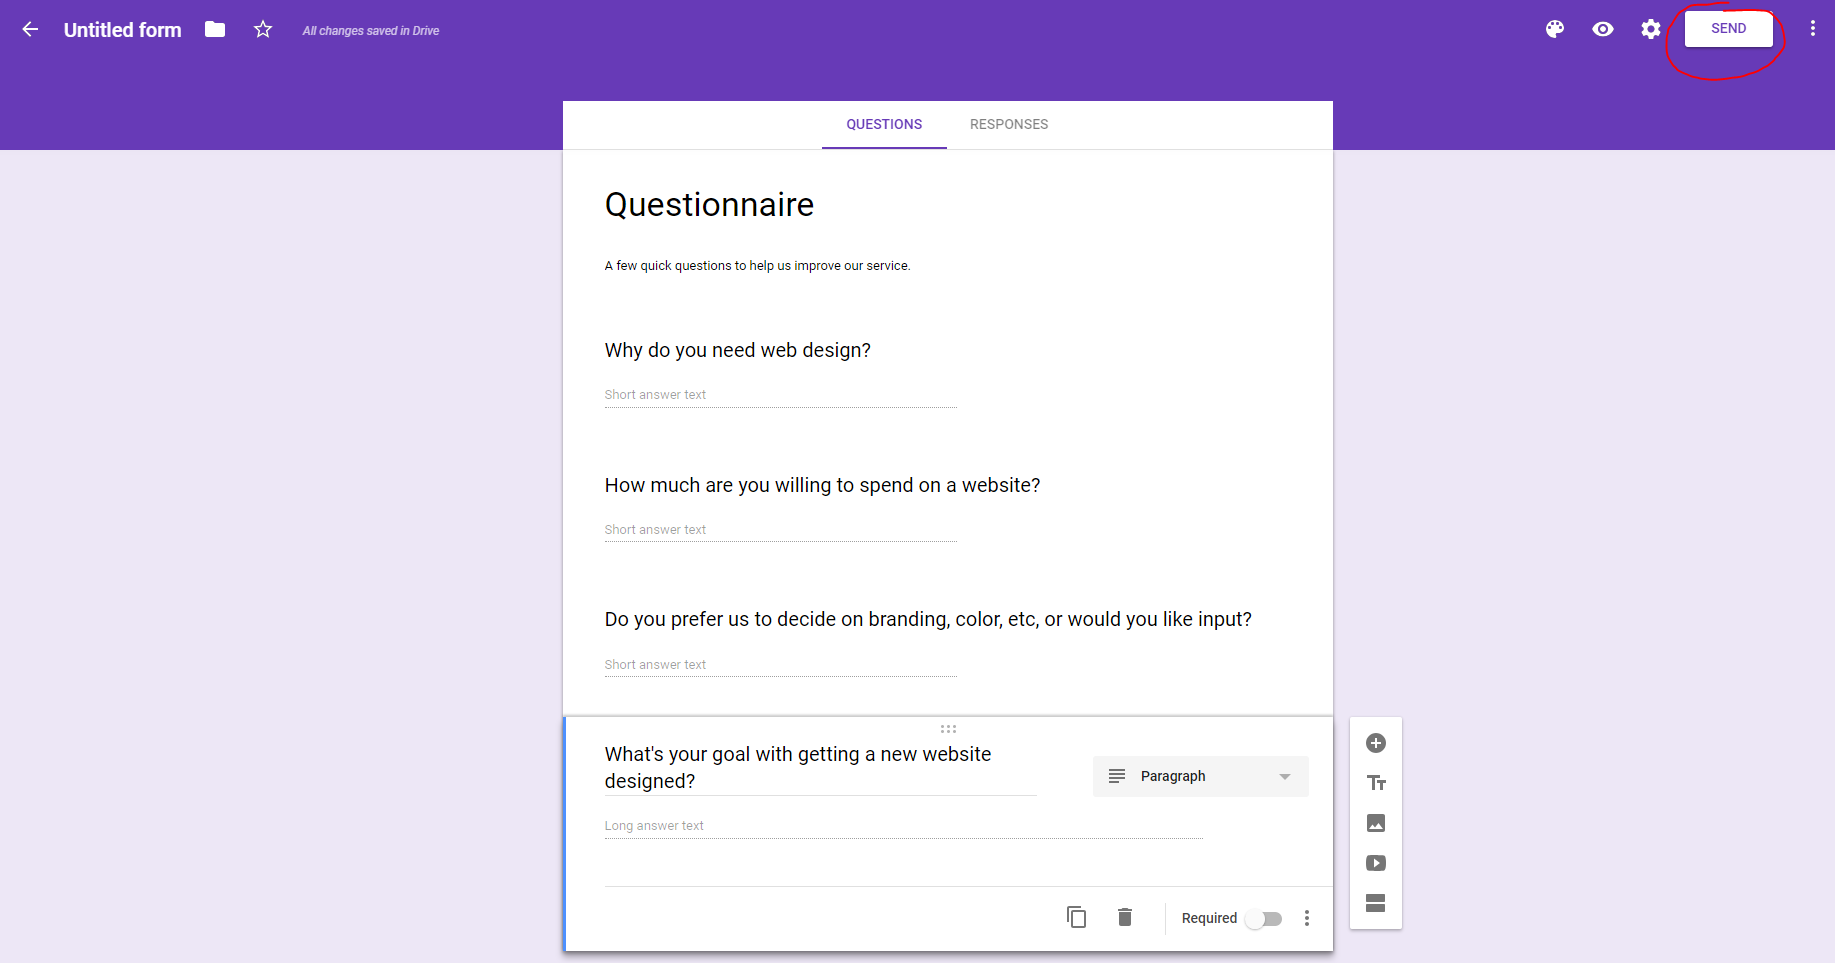 Creating a Google Form questionnaire